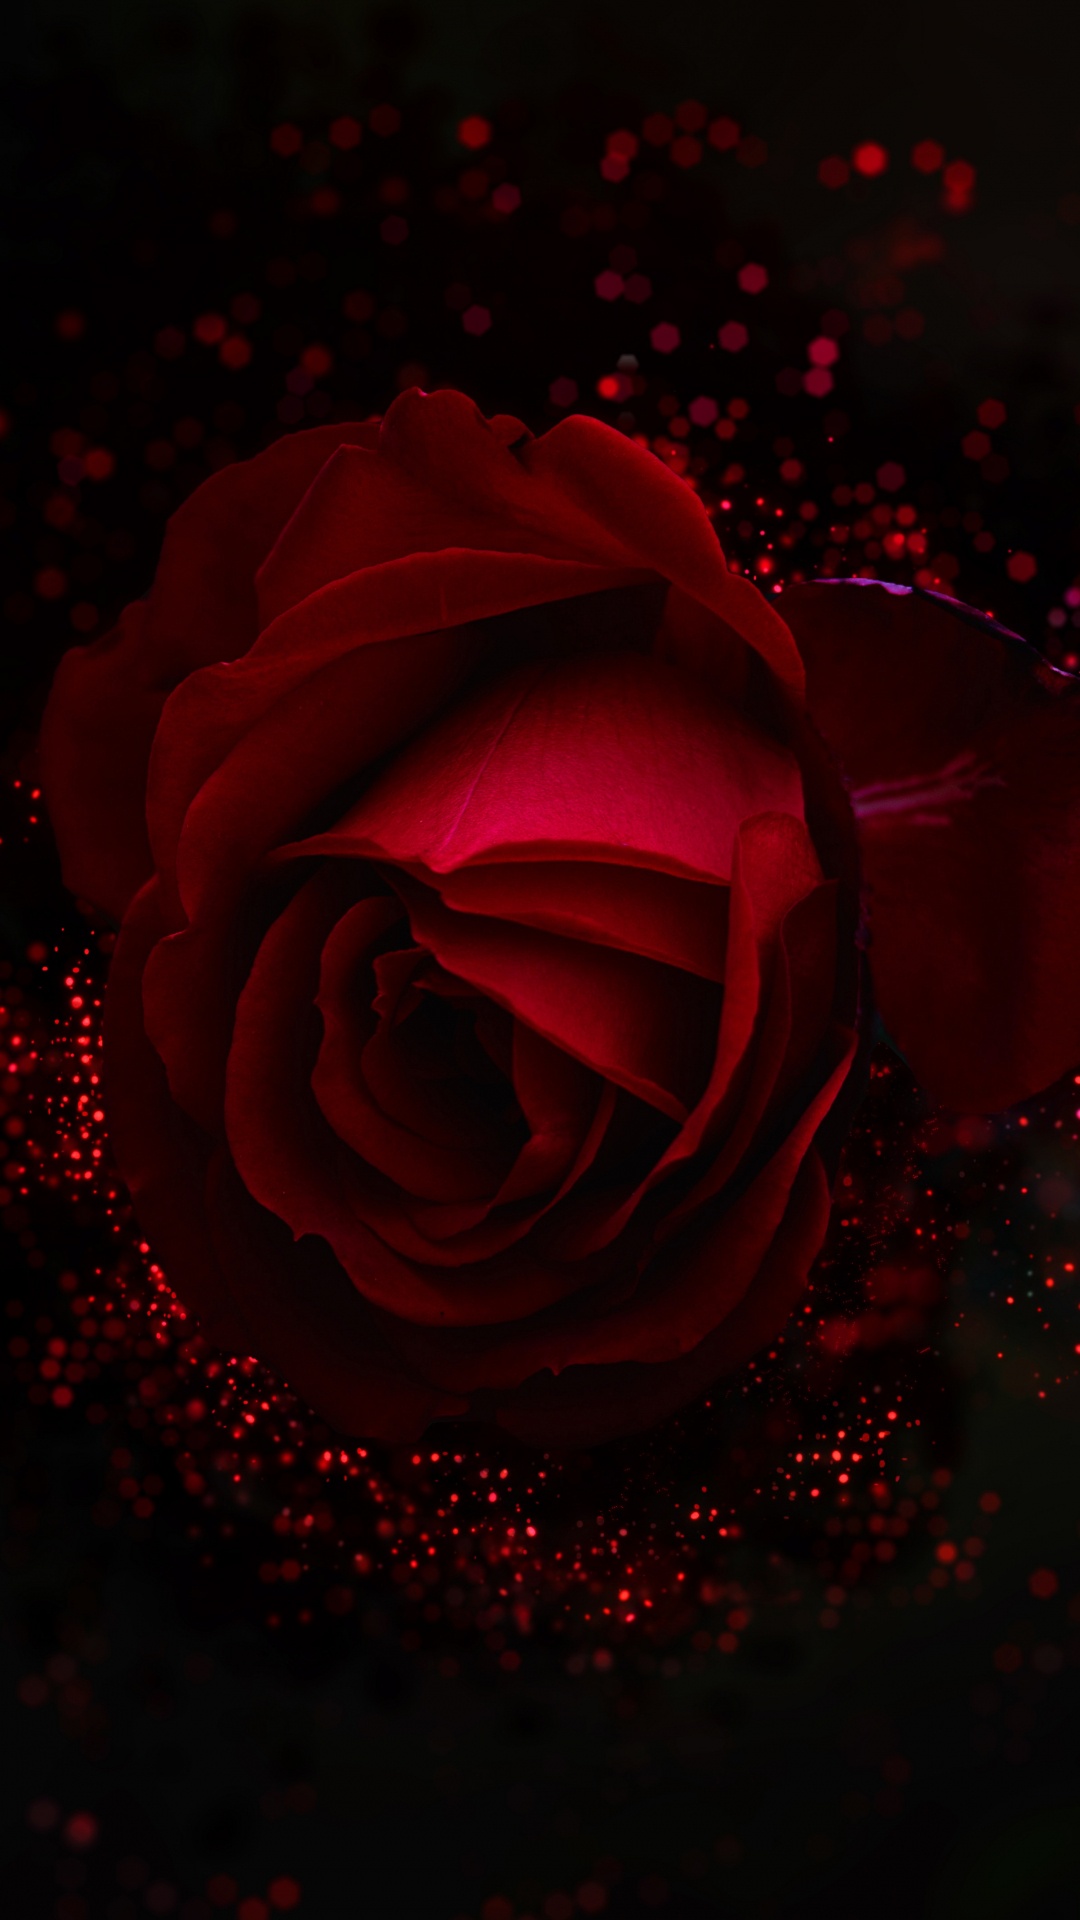 Red Rose With Water Droplets. Wallpaper in 1080x1920 Resolution